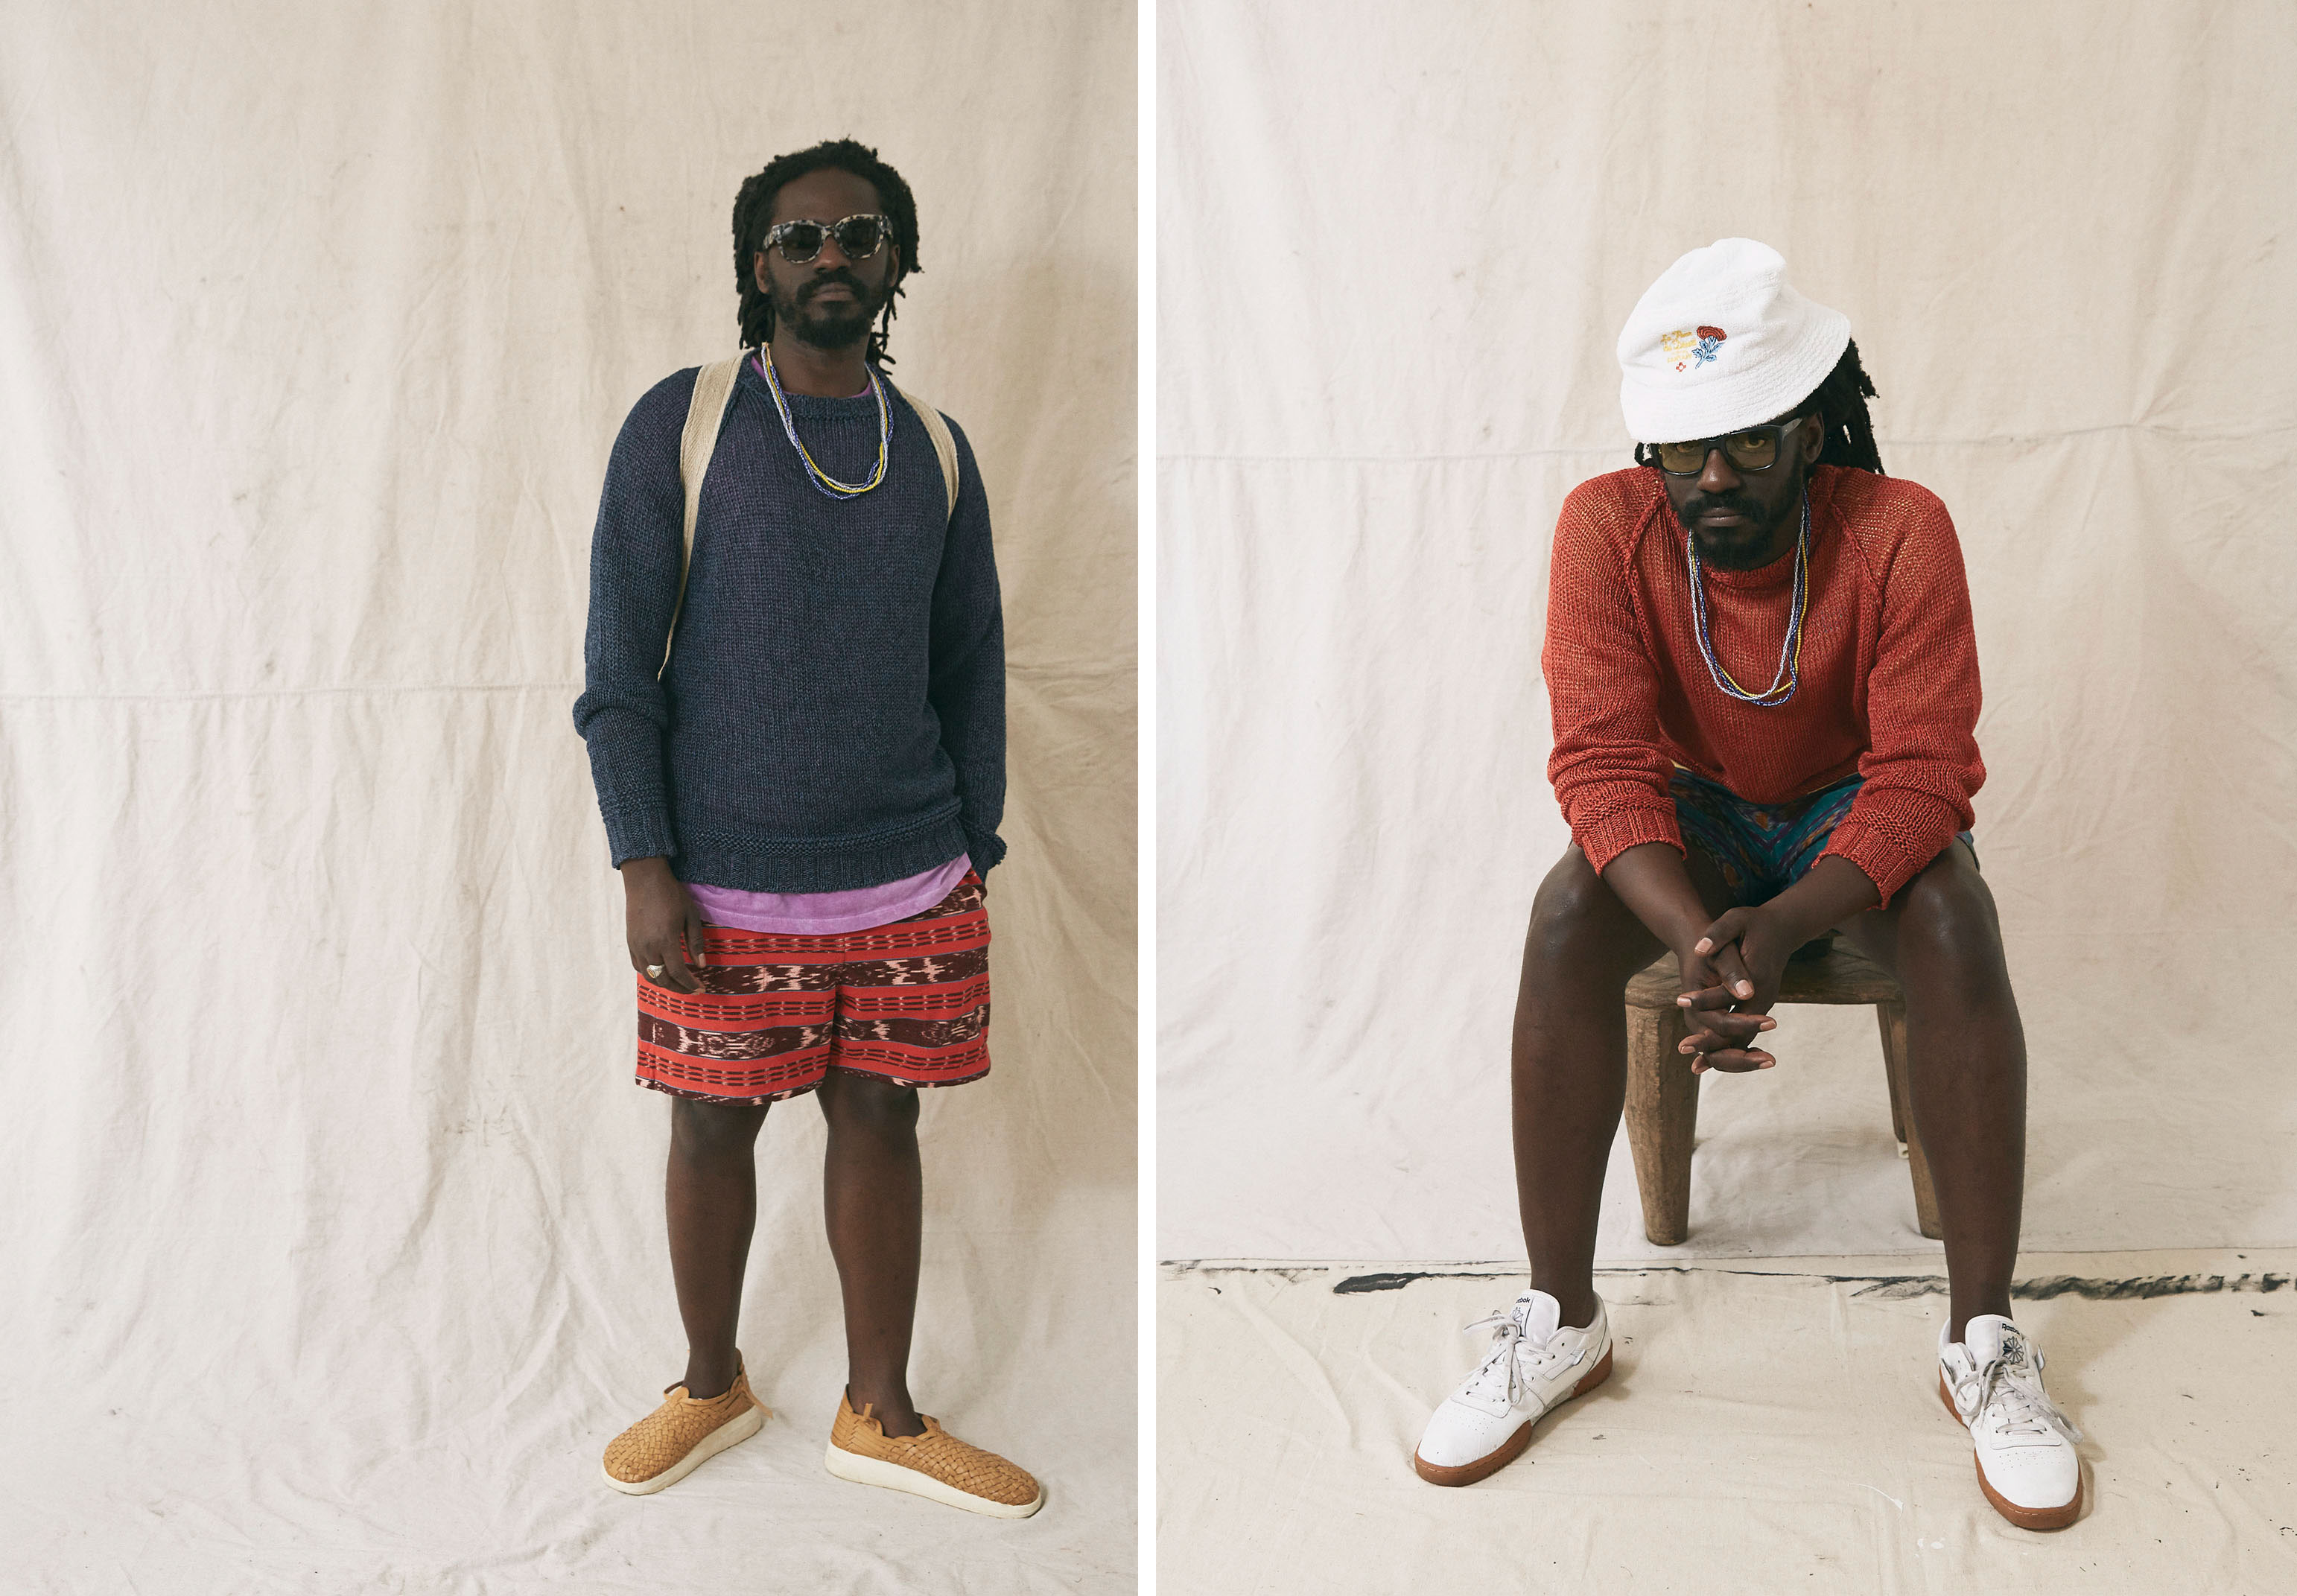 18 East Launches New Summer 2019 Collection